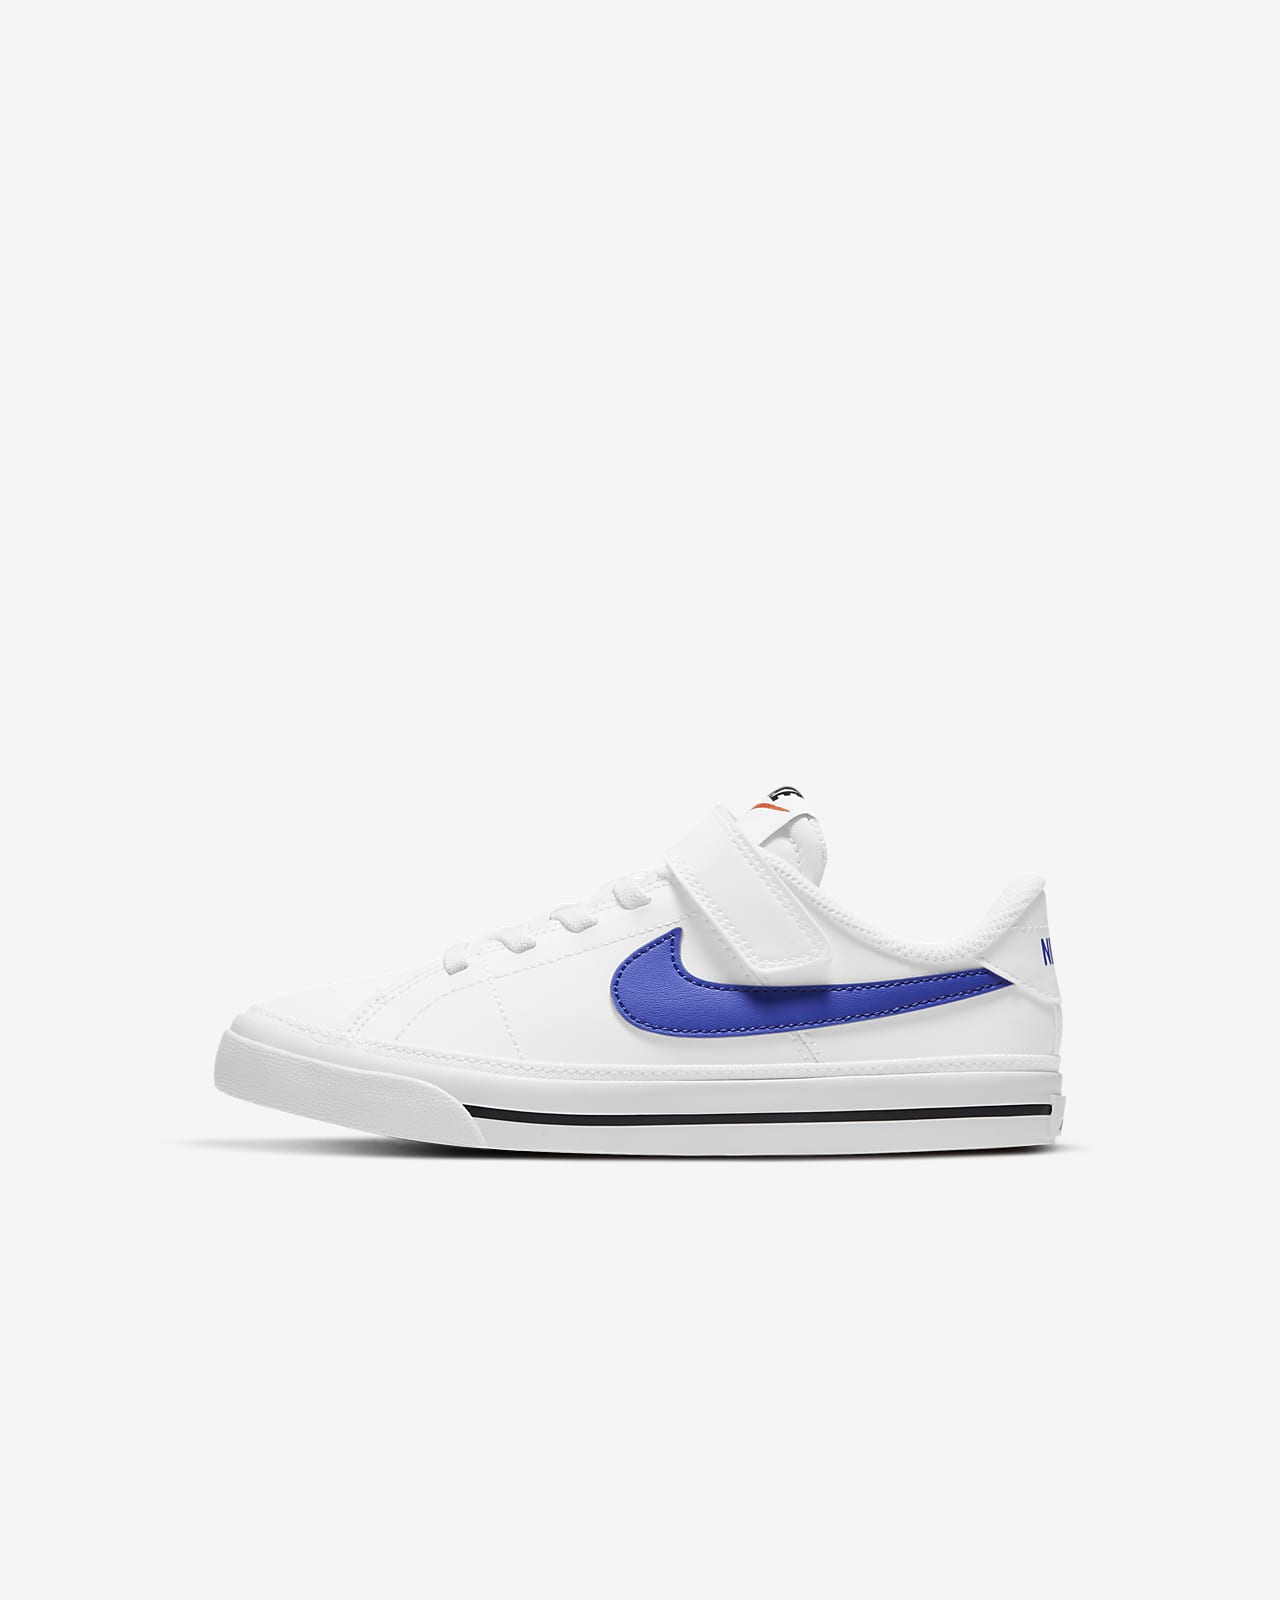 NikeCourt Legacy Younger Kids' Shoes